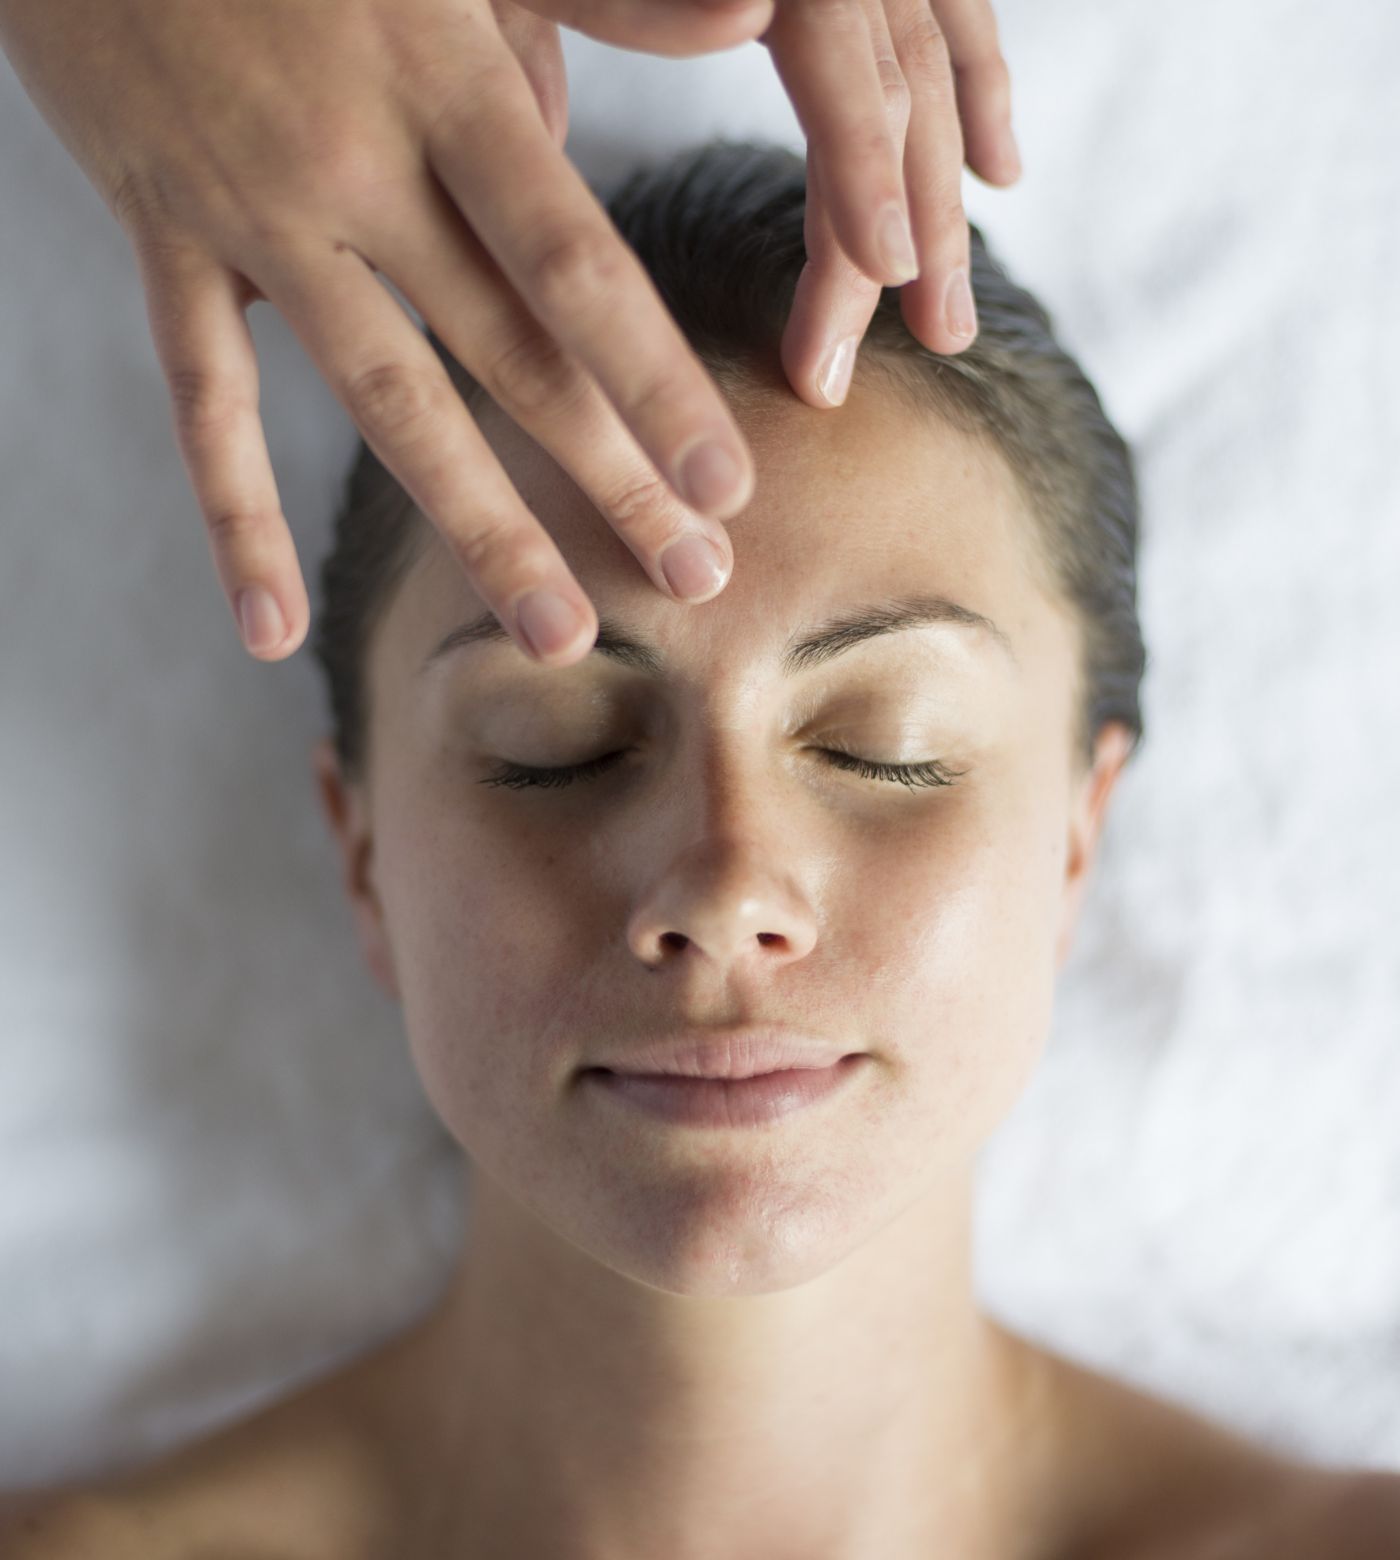 Woman receiving massage on forehead 